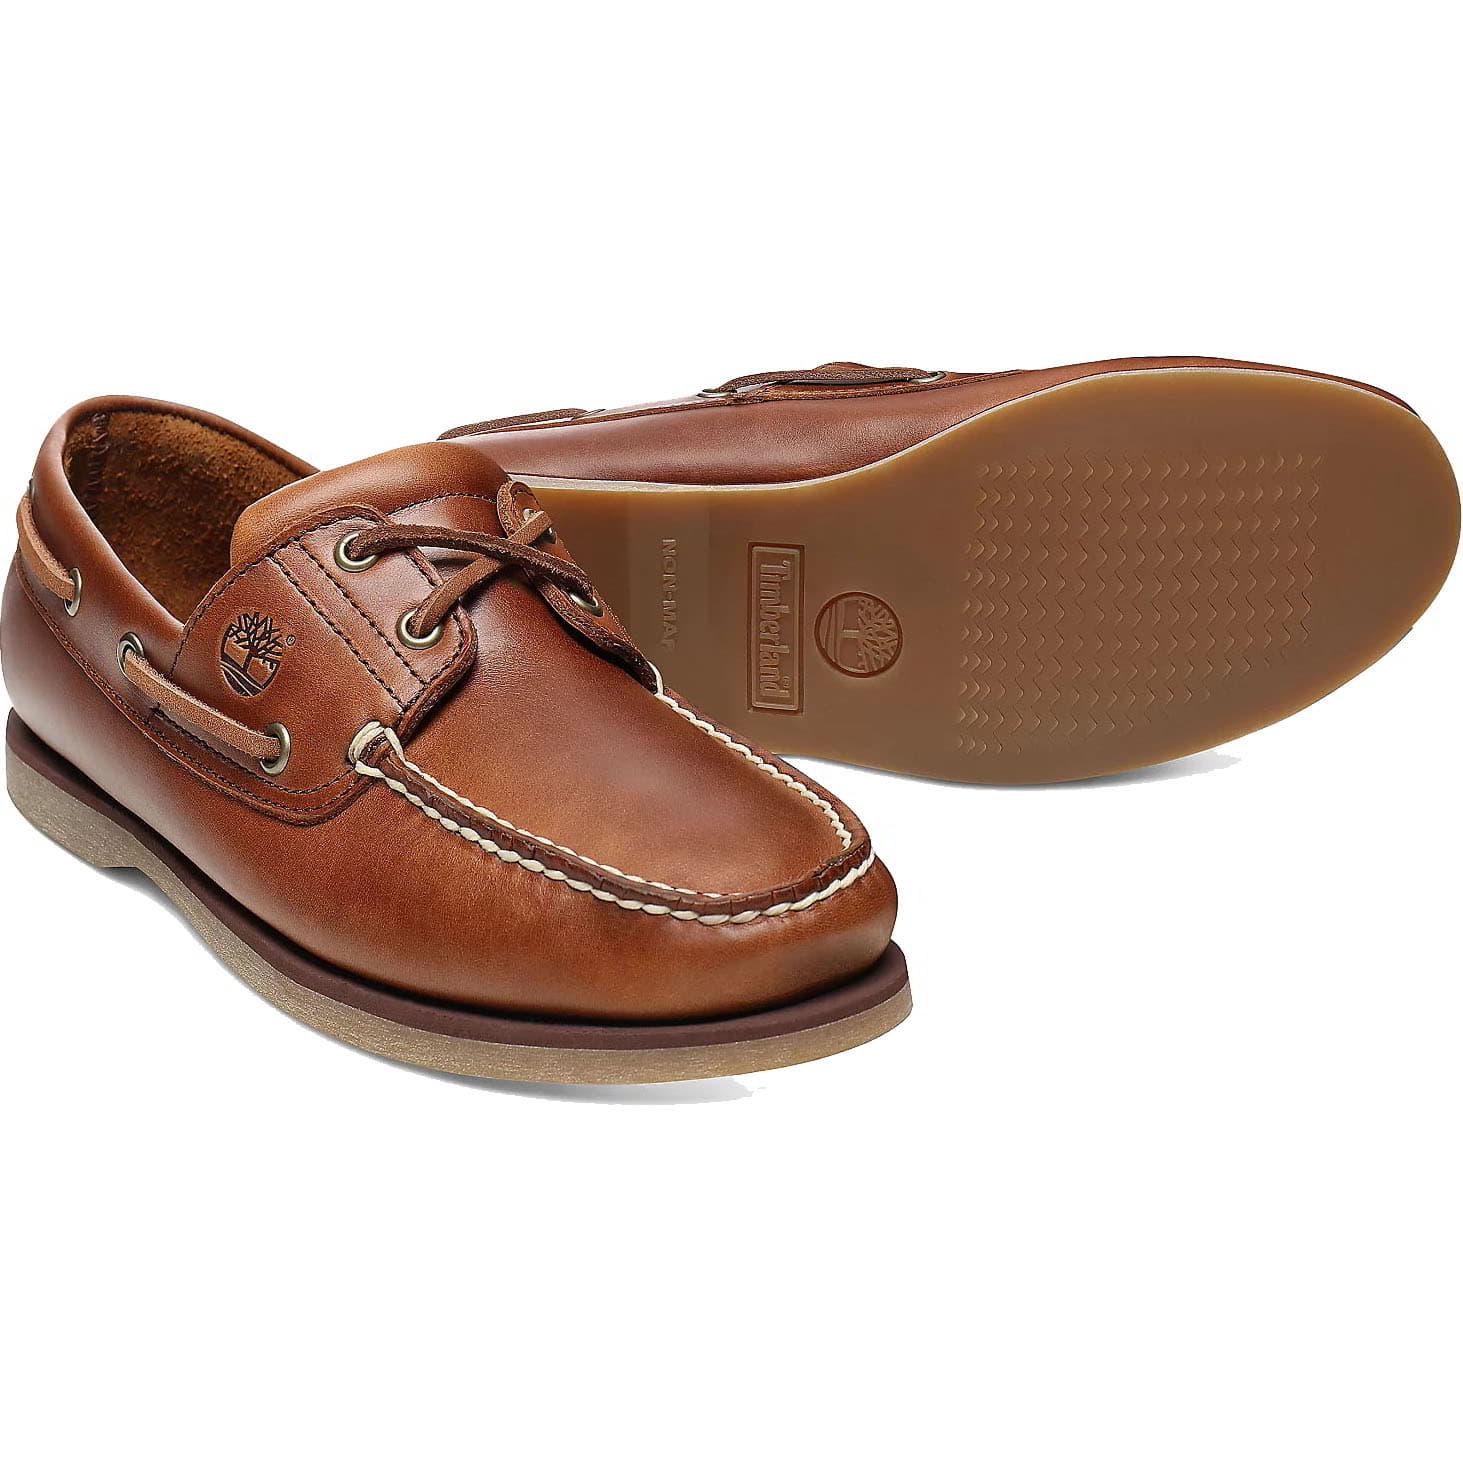 Timberland Mens Classic 2 Eye Boat Shoes - Brown A232X 2951